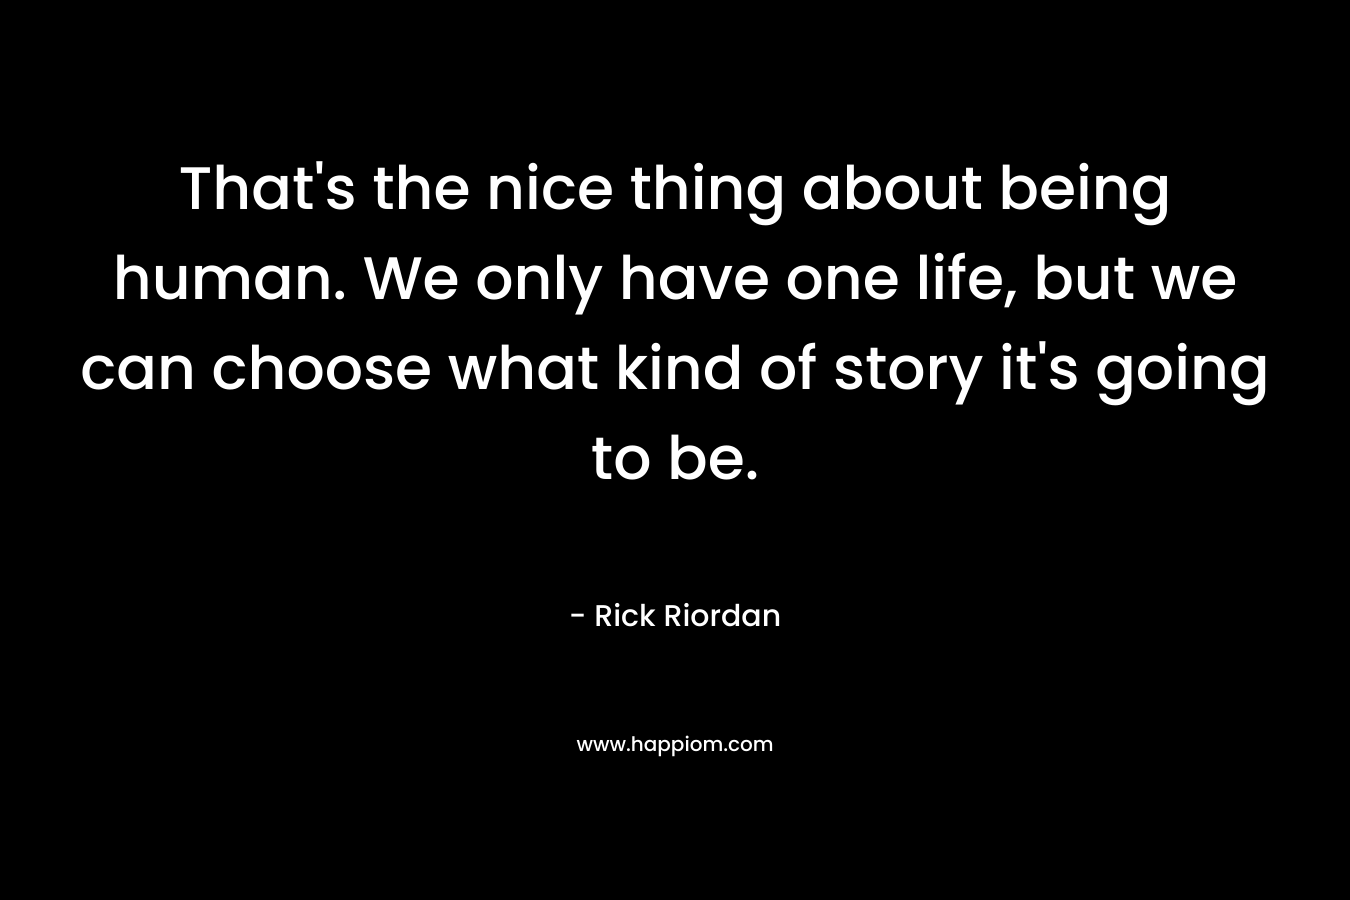 That's the nice thing about being human. We only have one life, but we can choose what kind of story it's going to be.